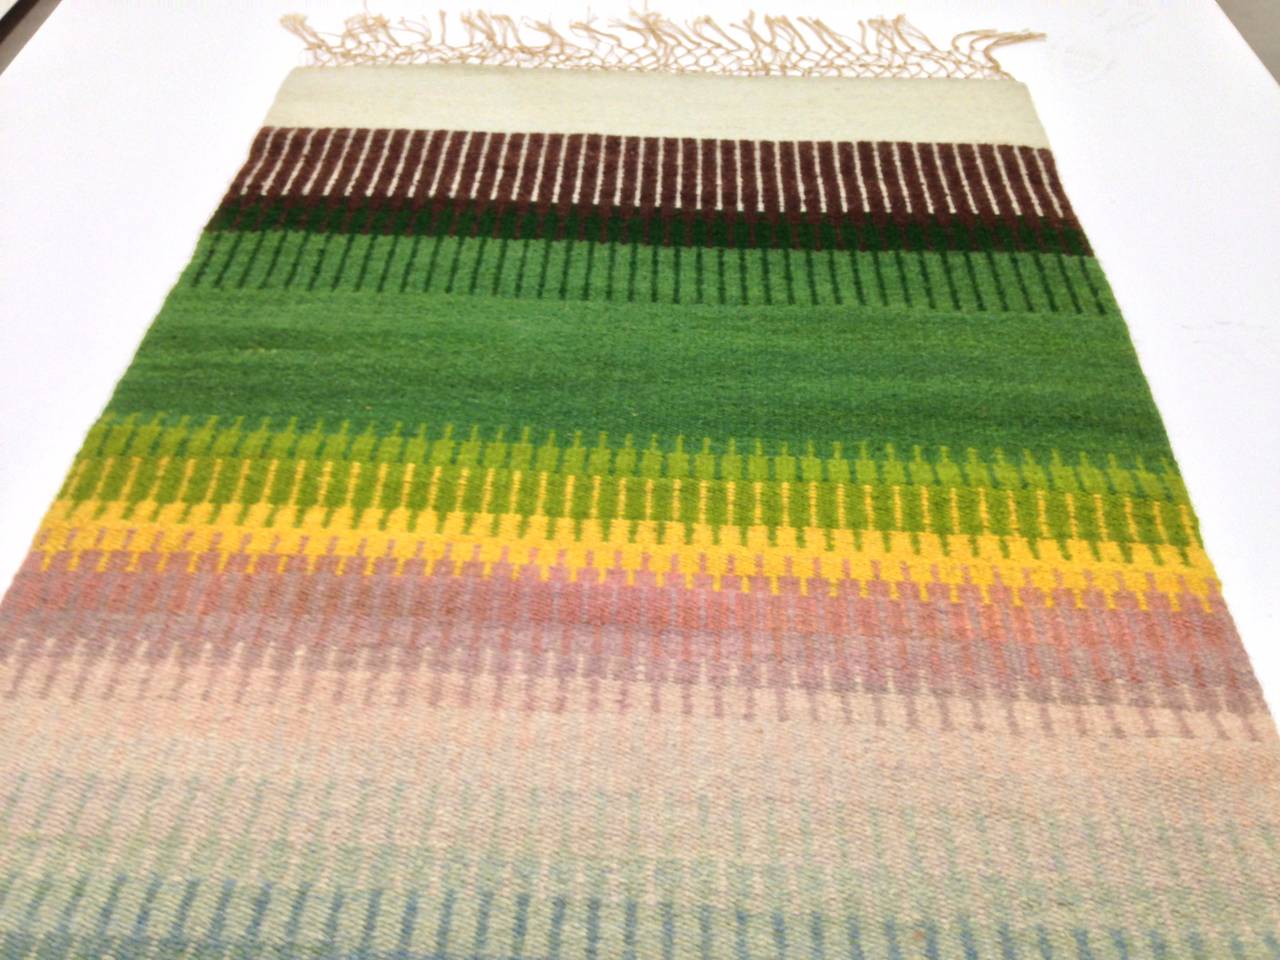 Finely woven wall art, flow of teak to pinks, yellow, greens to browns. Signed and dated Lana Lewis, 1986.